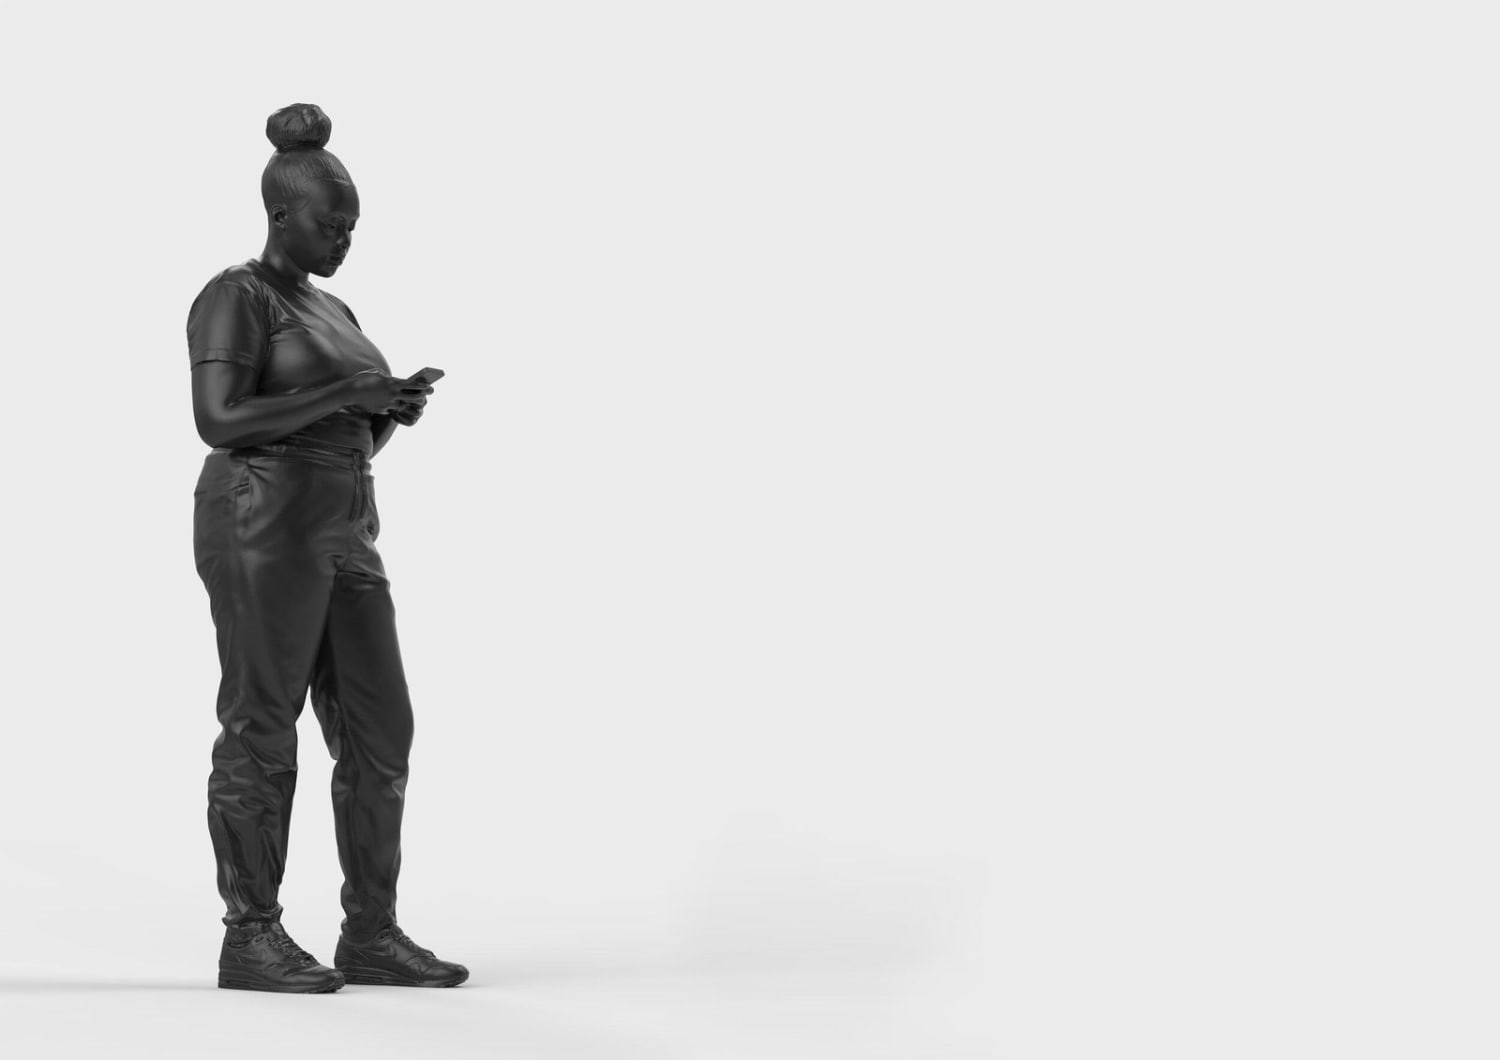 Amid Reckoning on Public Art, Statue of Black 'Everywoman' Unveiled in London